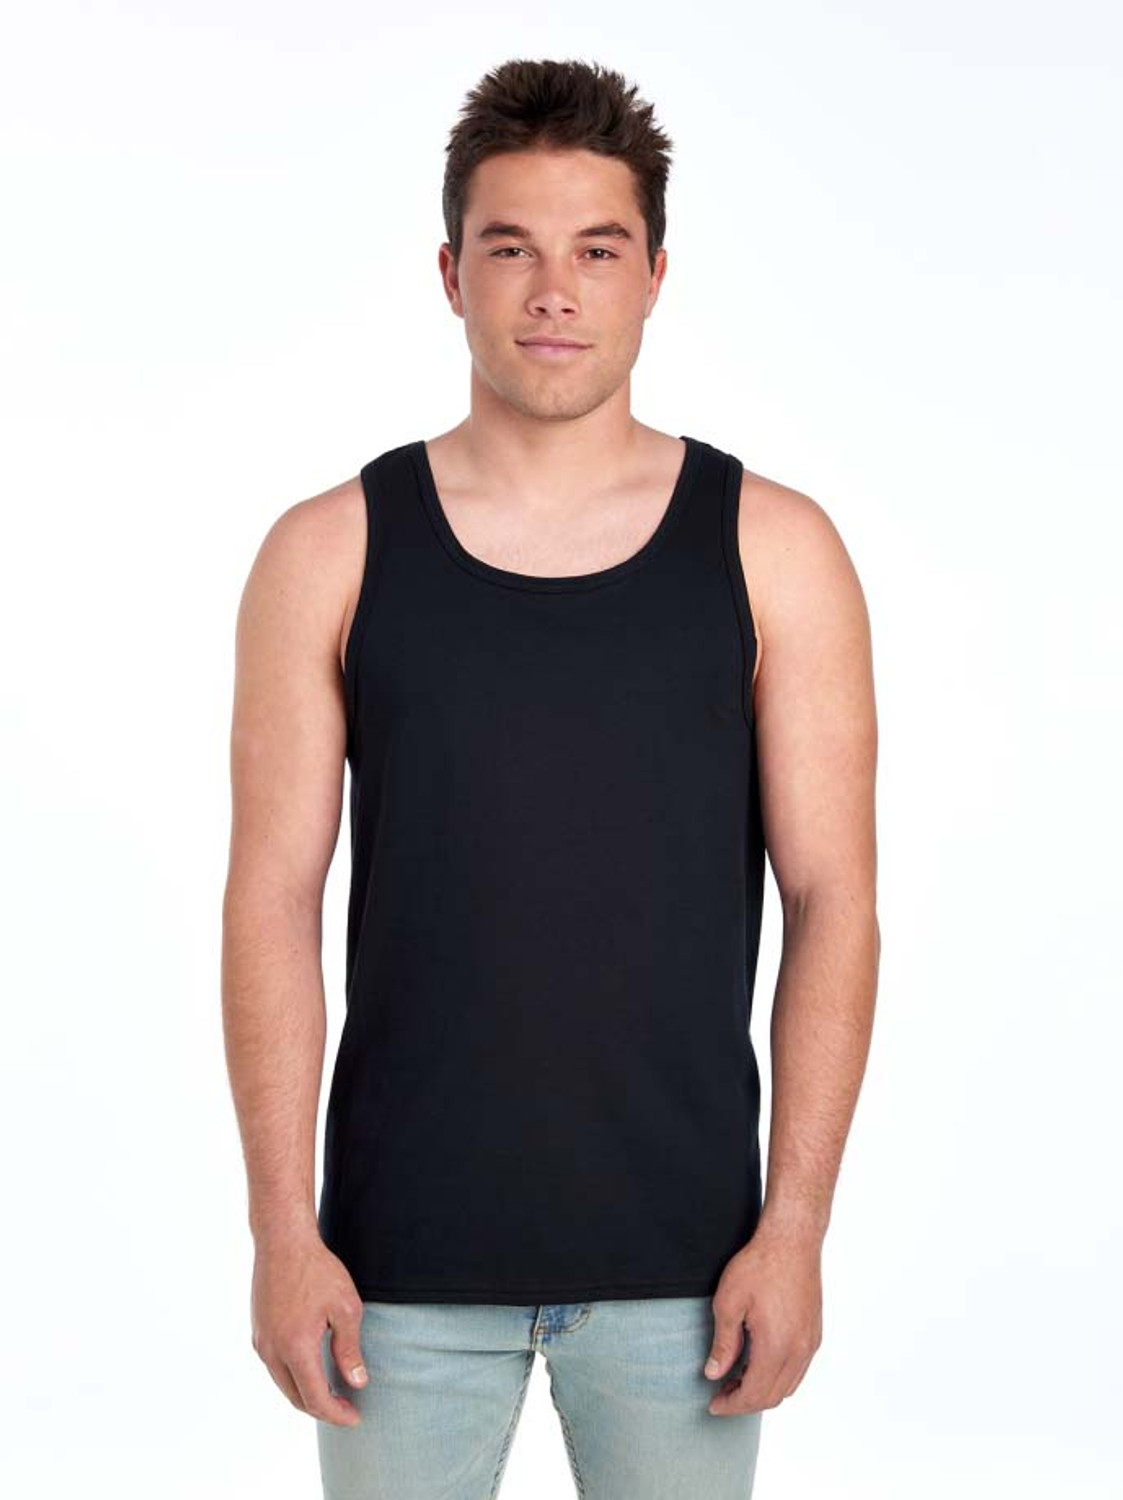 https://cdn11.bigcommerce.com/s-ce94a/images/stencil/1500x1500/products/2462/34690/39tkr-fruit-of-the-loom-tank-top-blankclothing.ca-black__20576.1678298478.jpg?c=2